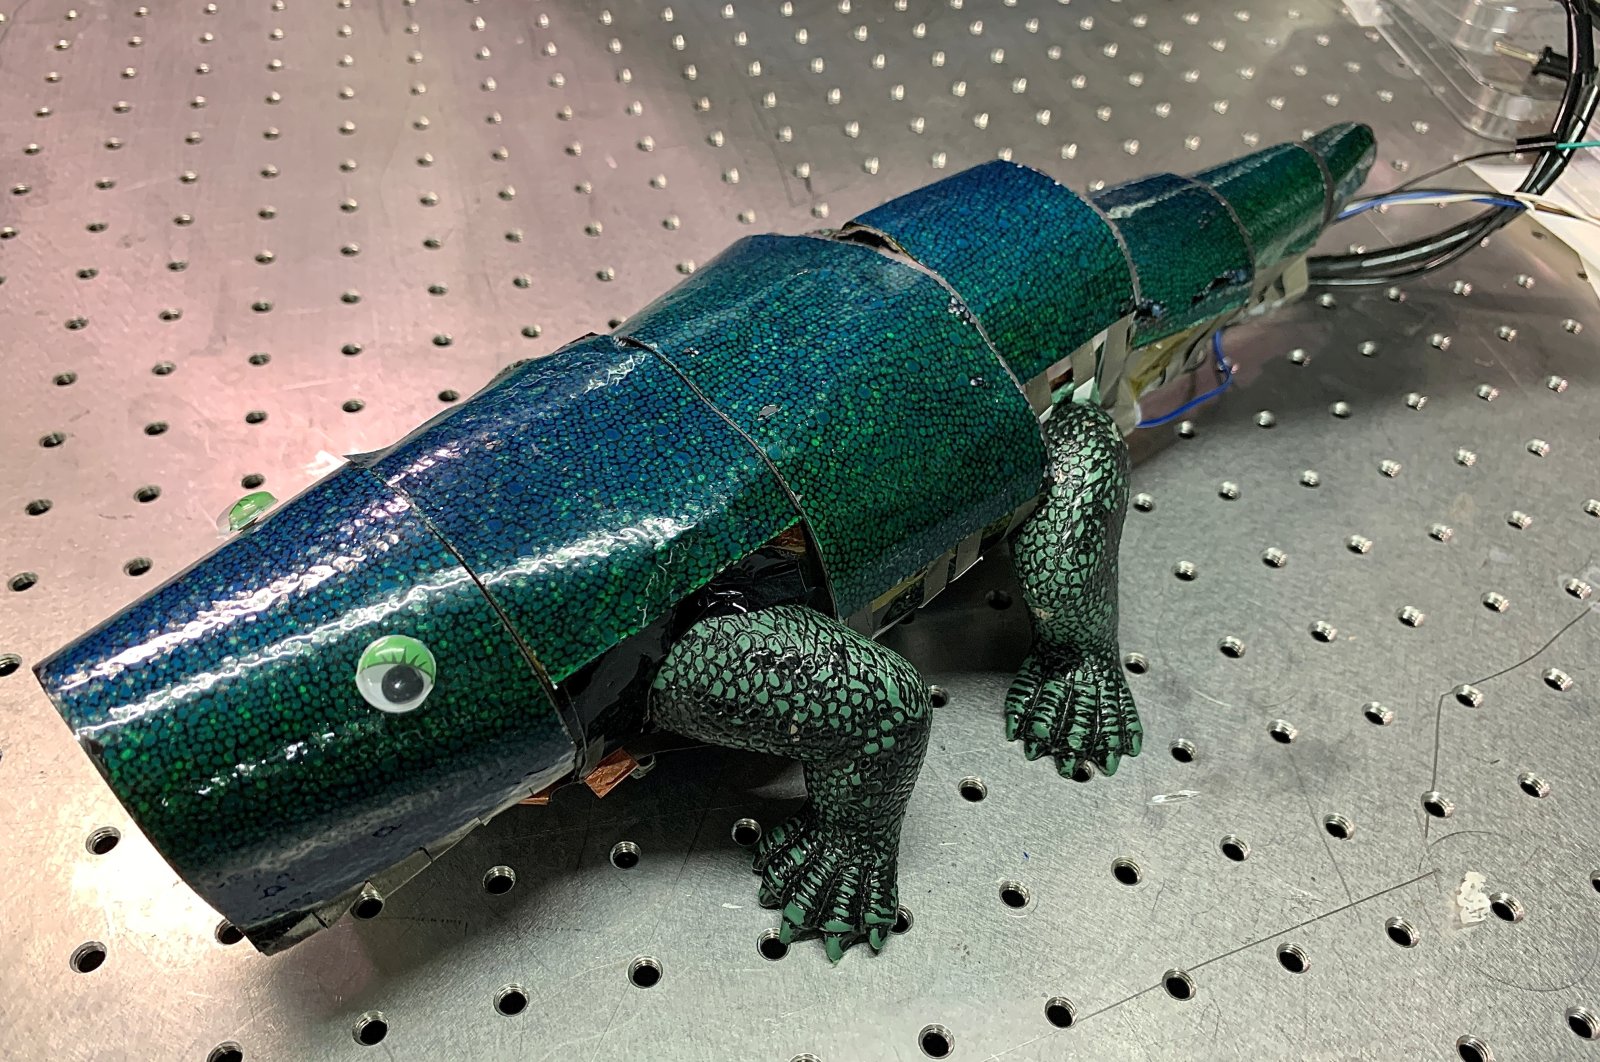 A chameleon robot covered with artificial skin that can change its color based on surroundings is seen in Seoul, South Korea, Sept. 7, 2021. (Reuters Photo)